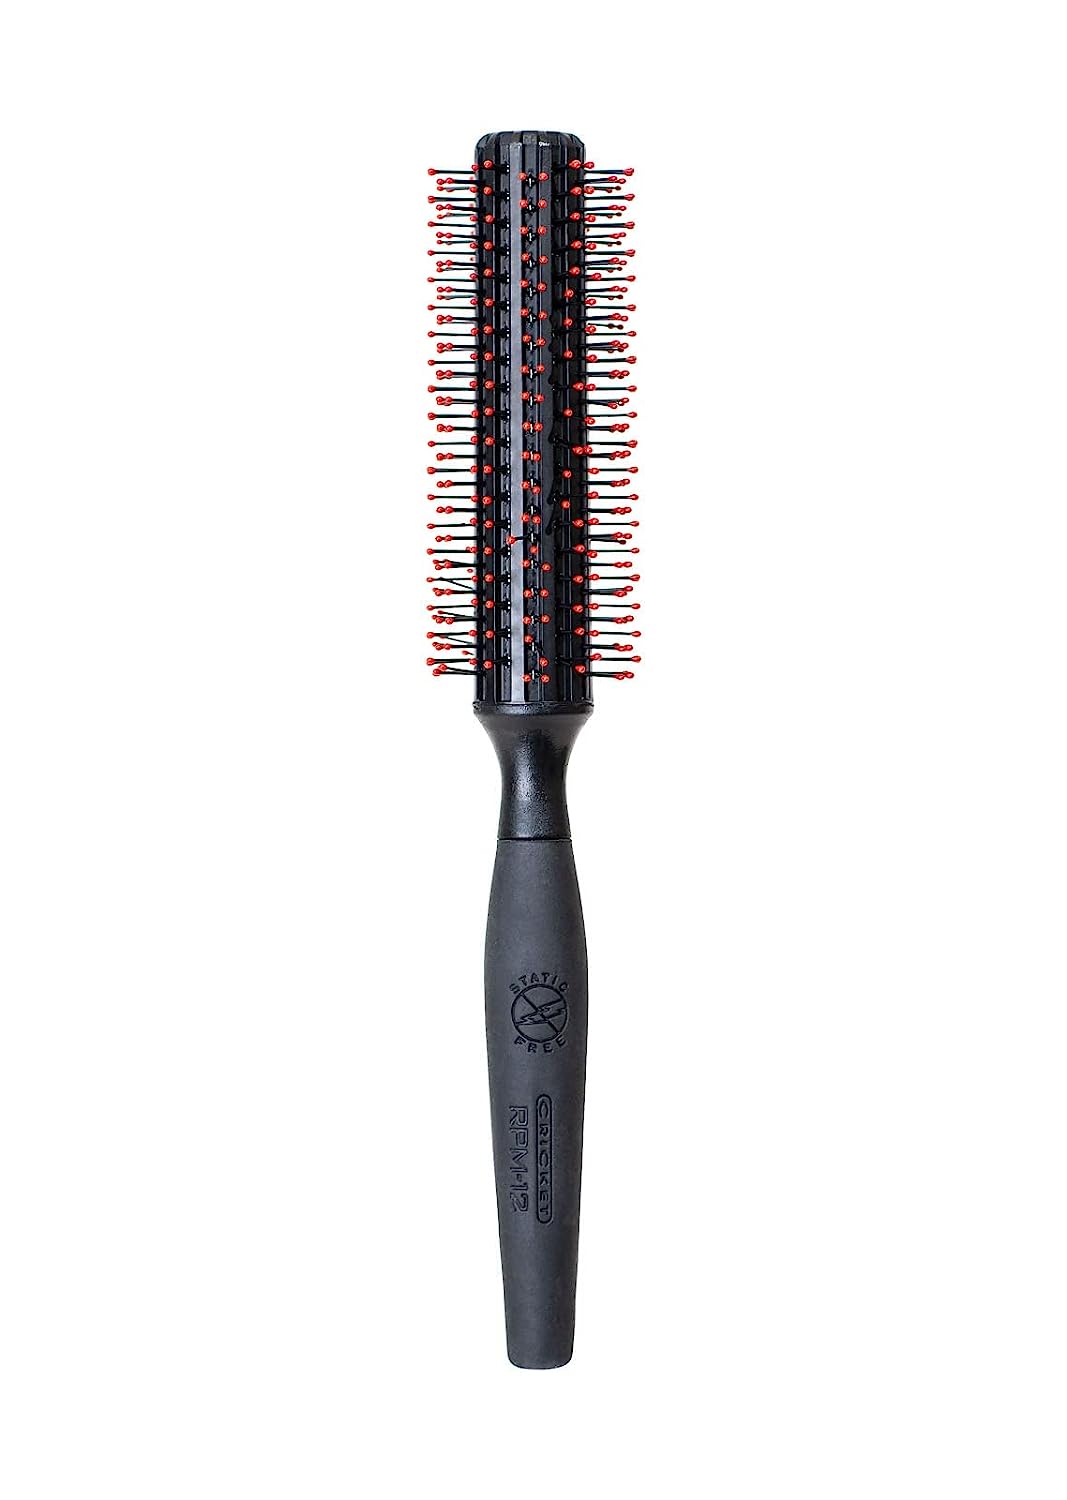 Cricket Static Free RPM 12 Row Round Hair Brush for [...]